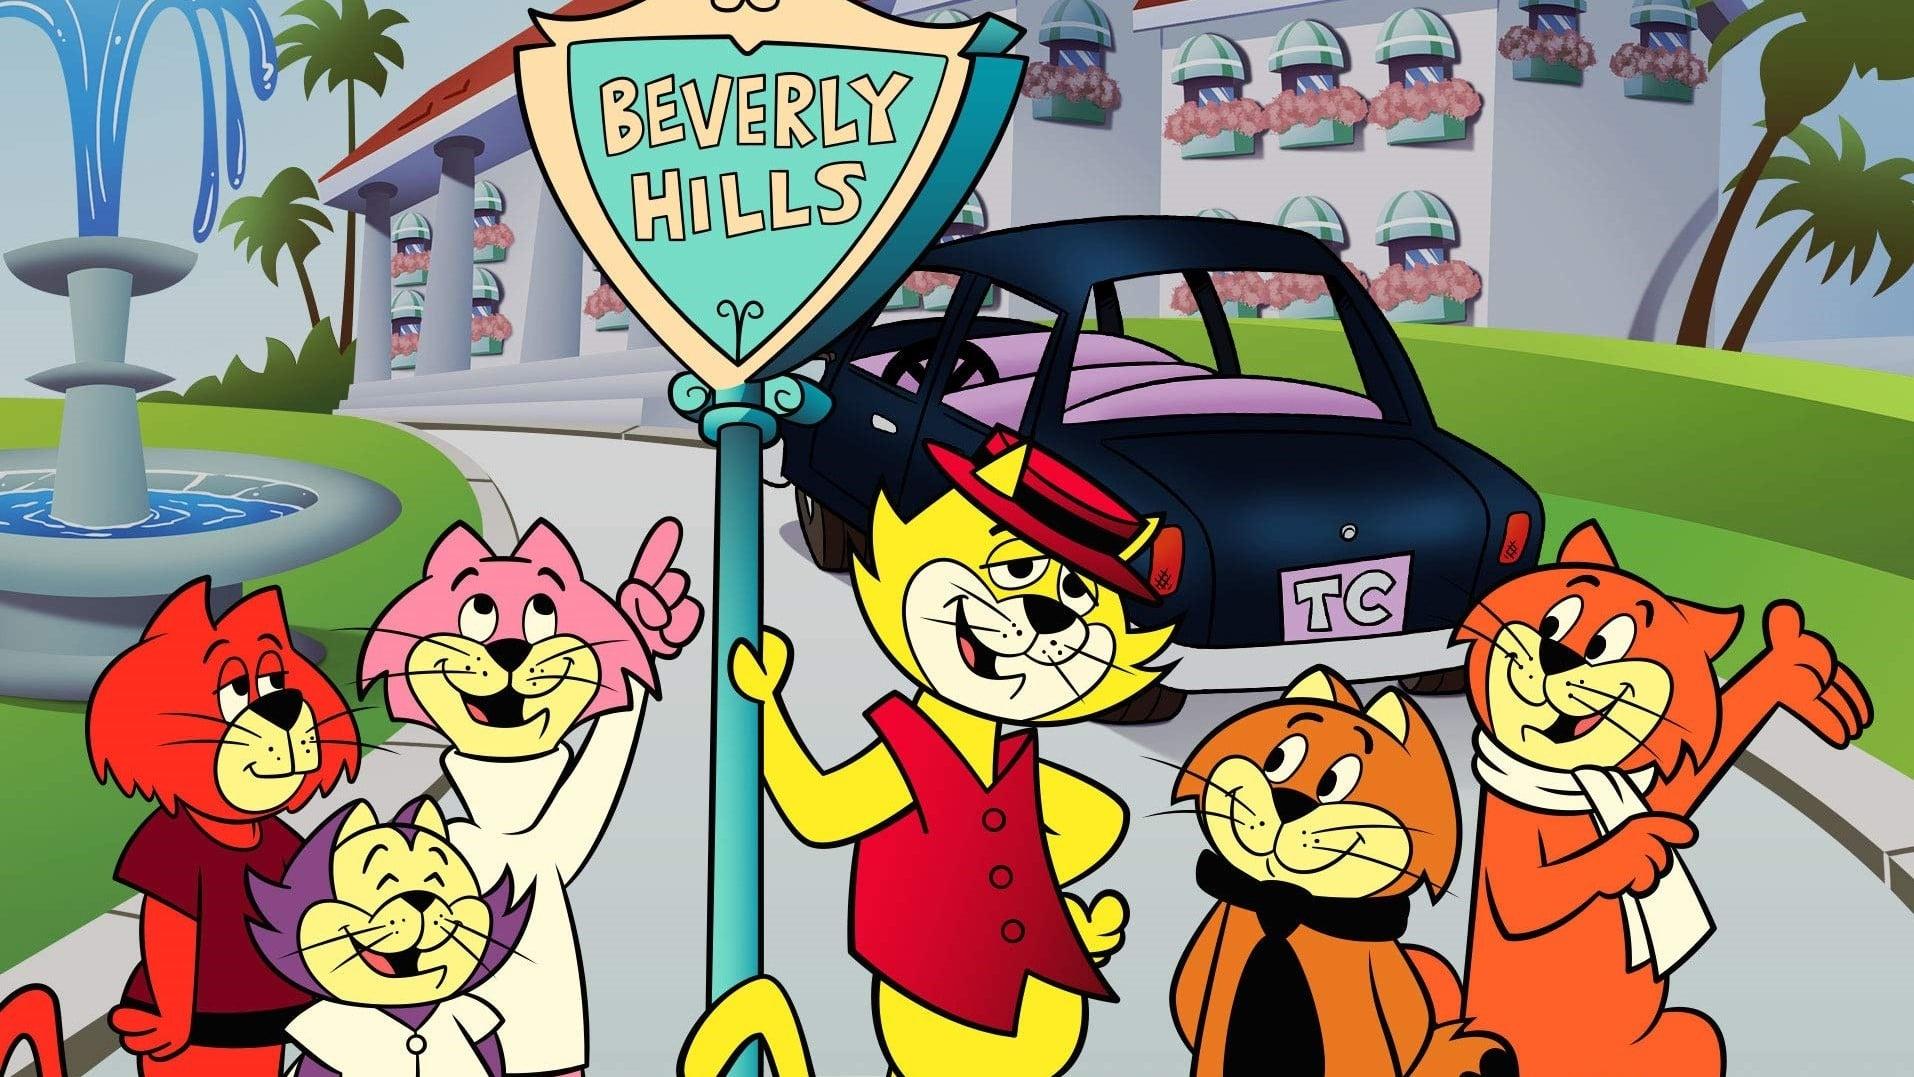 Top Cat and the Beverly Hills Cats backdrop